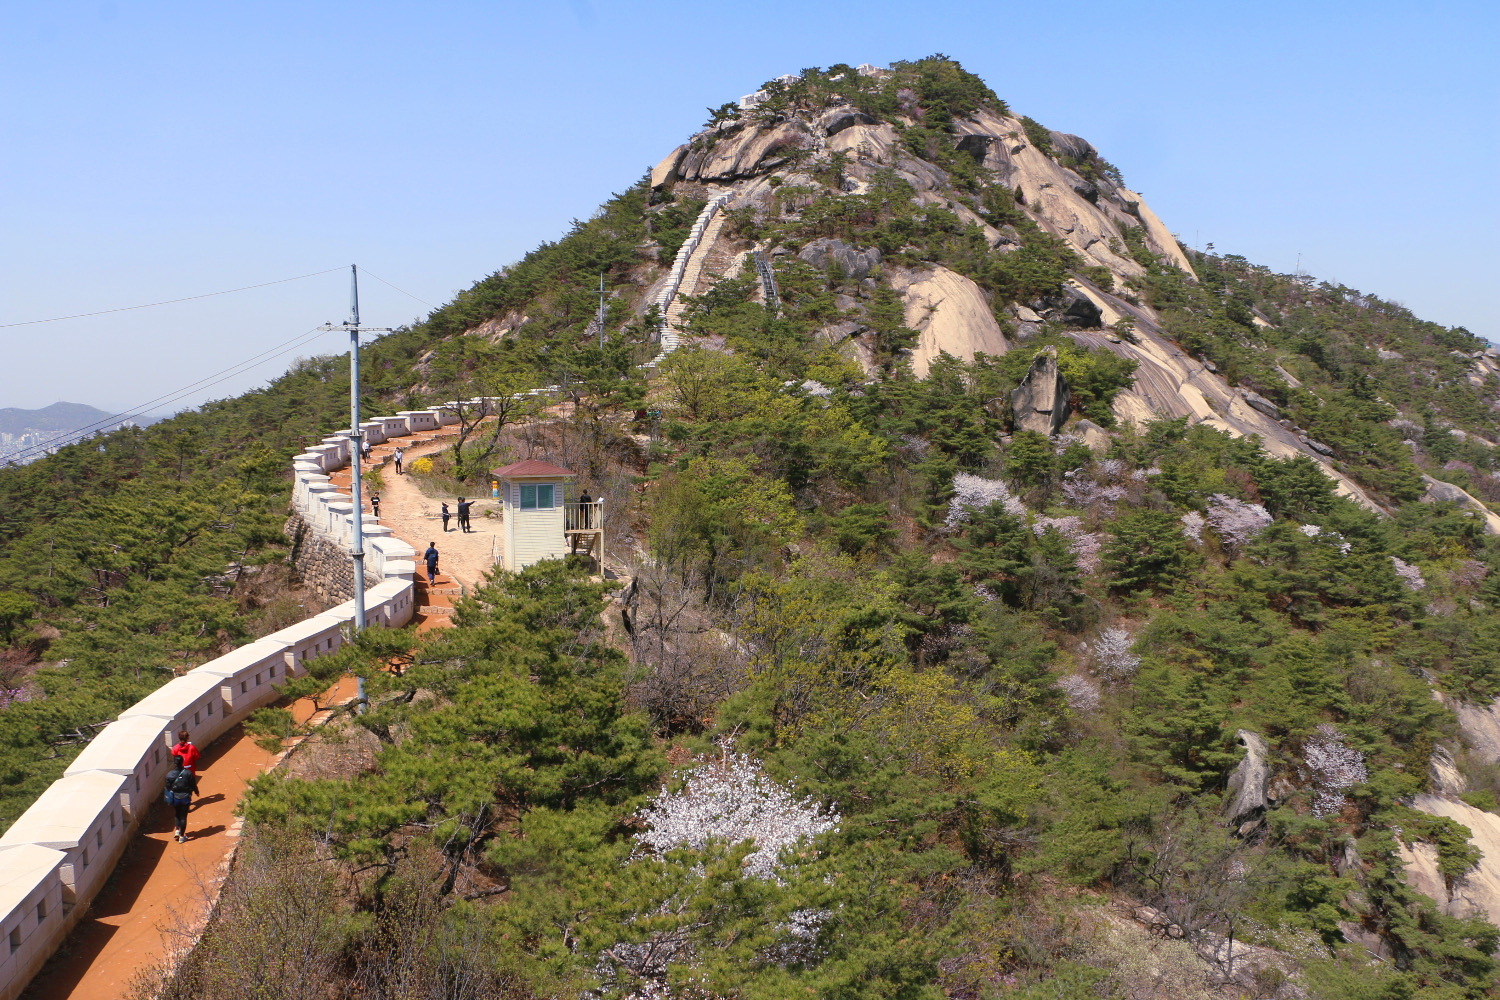 Seoul City Wall, rising up to summit of Inwangsan. Image by Simon Richmond / Lonely Planet